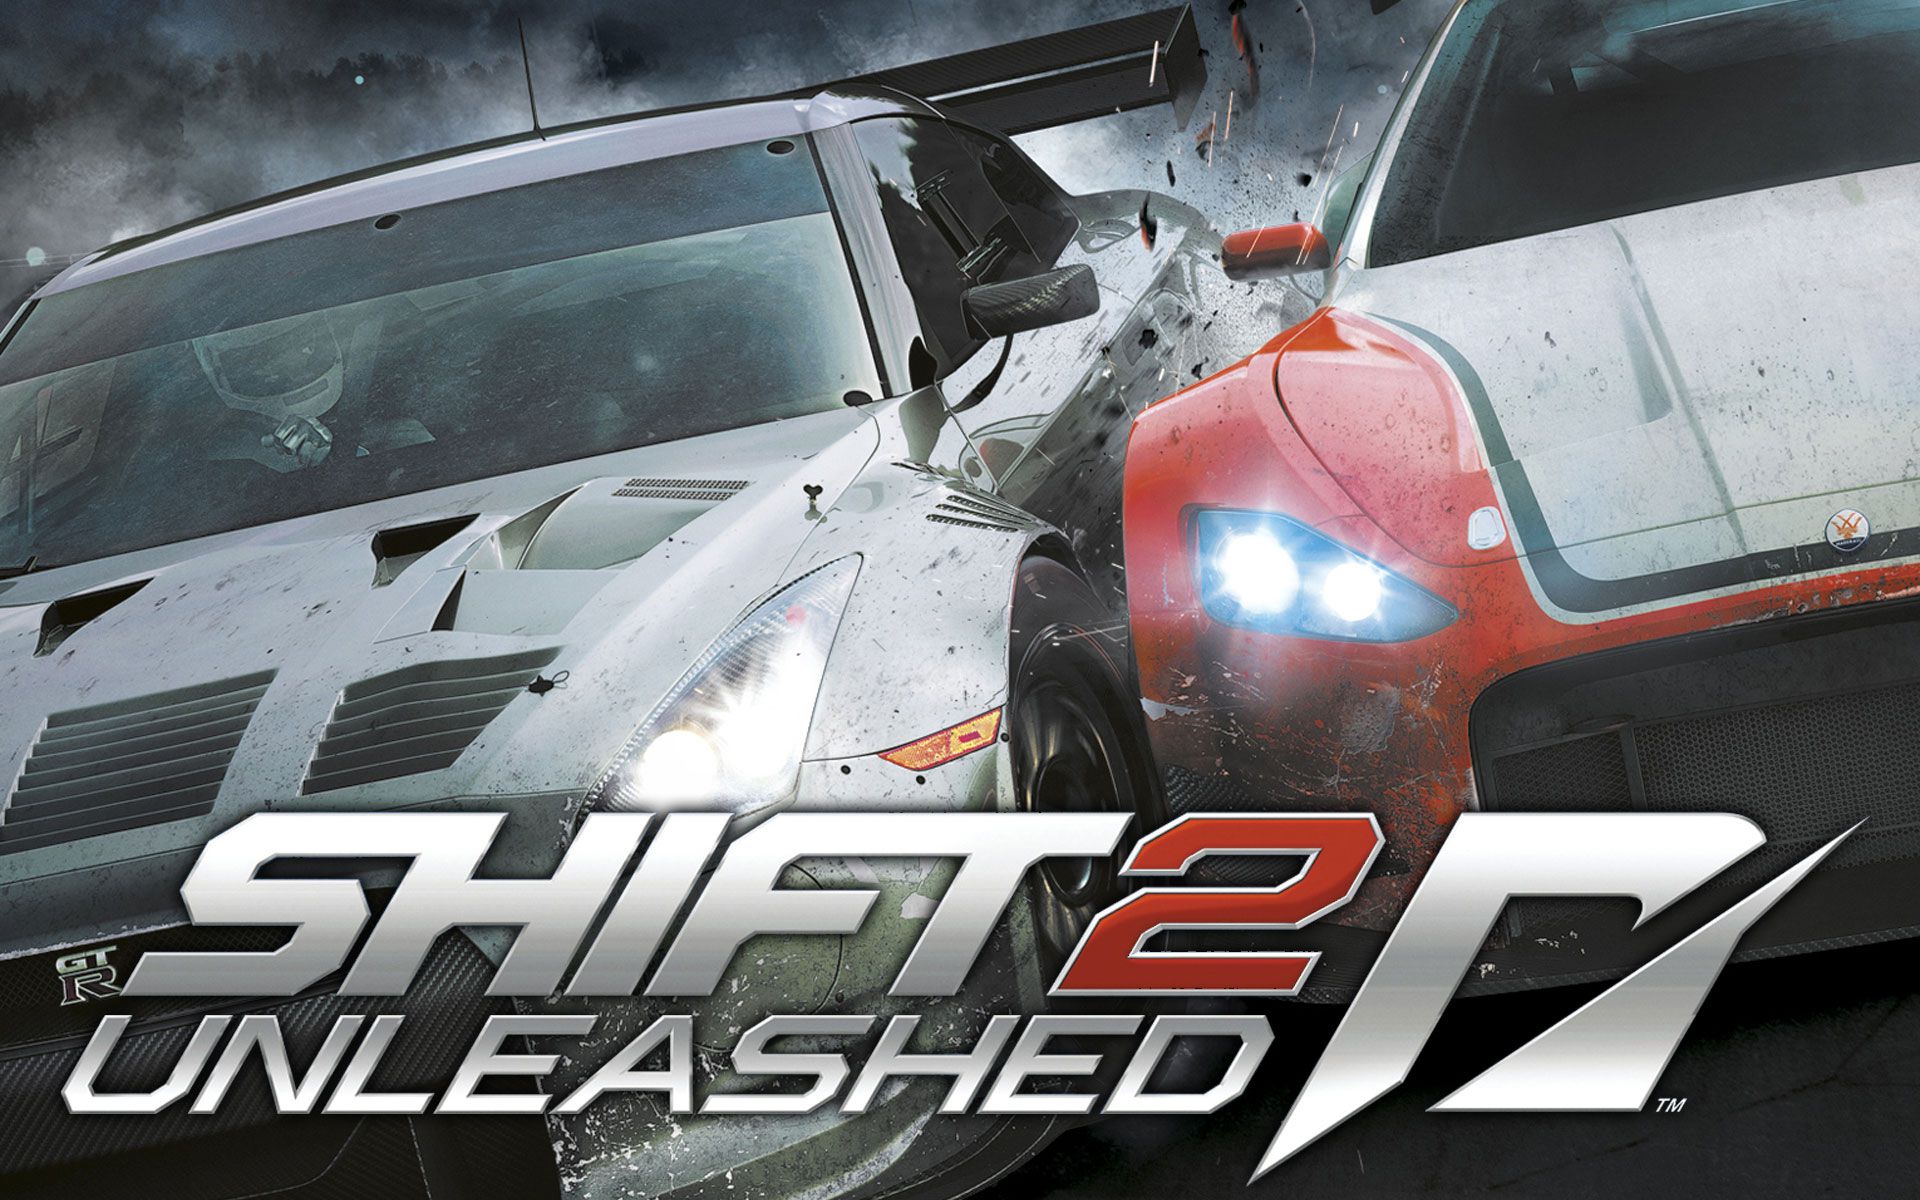 Speed returns. Shift 2 unleashed. Нфс Shift 2 unleashed. NFS Shift 2 unleashed гонки. Need for Speed unleashed 2.